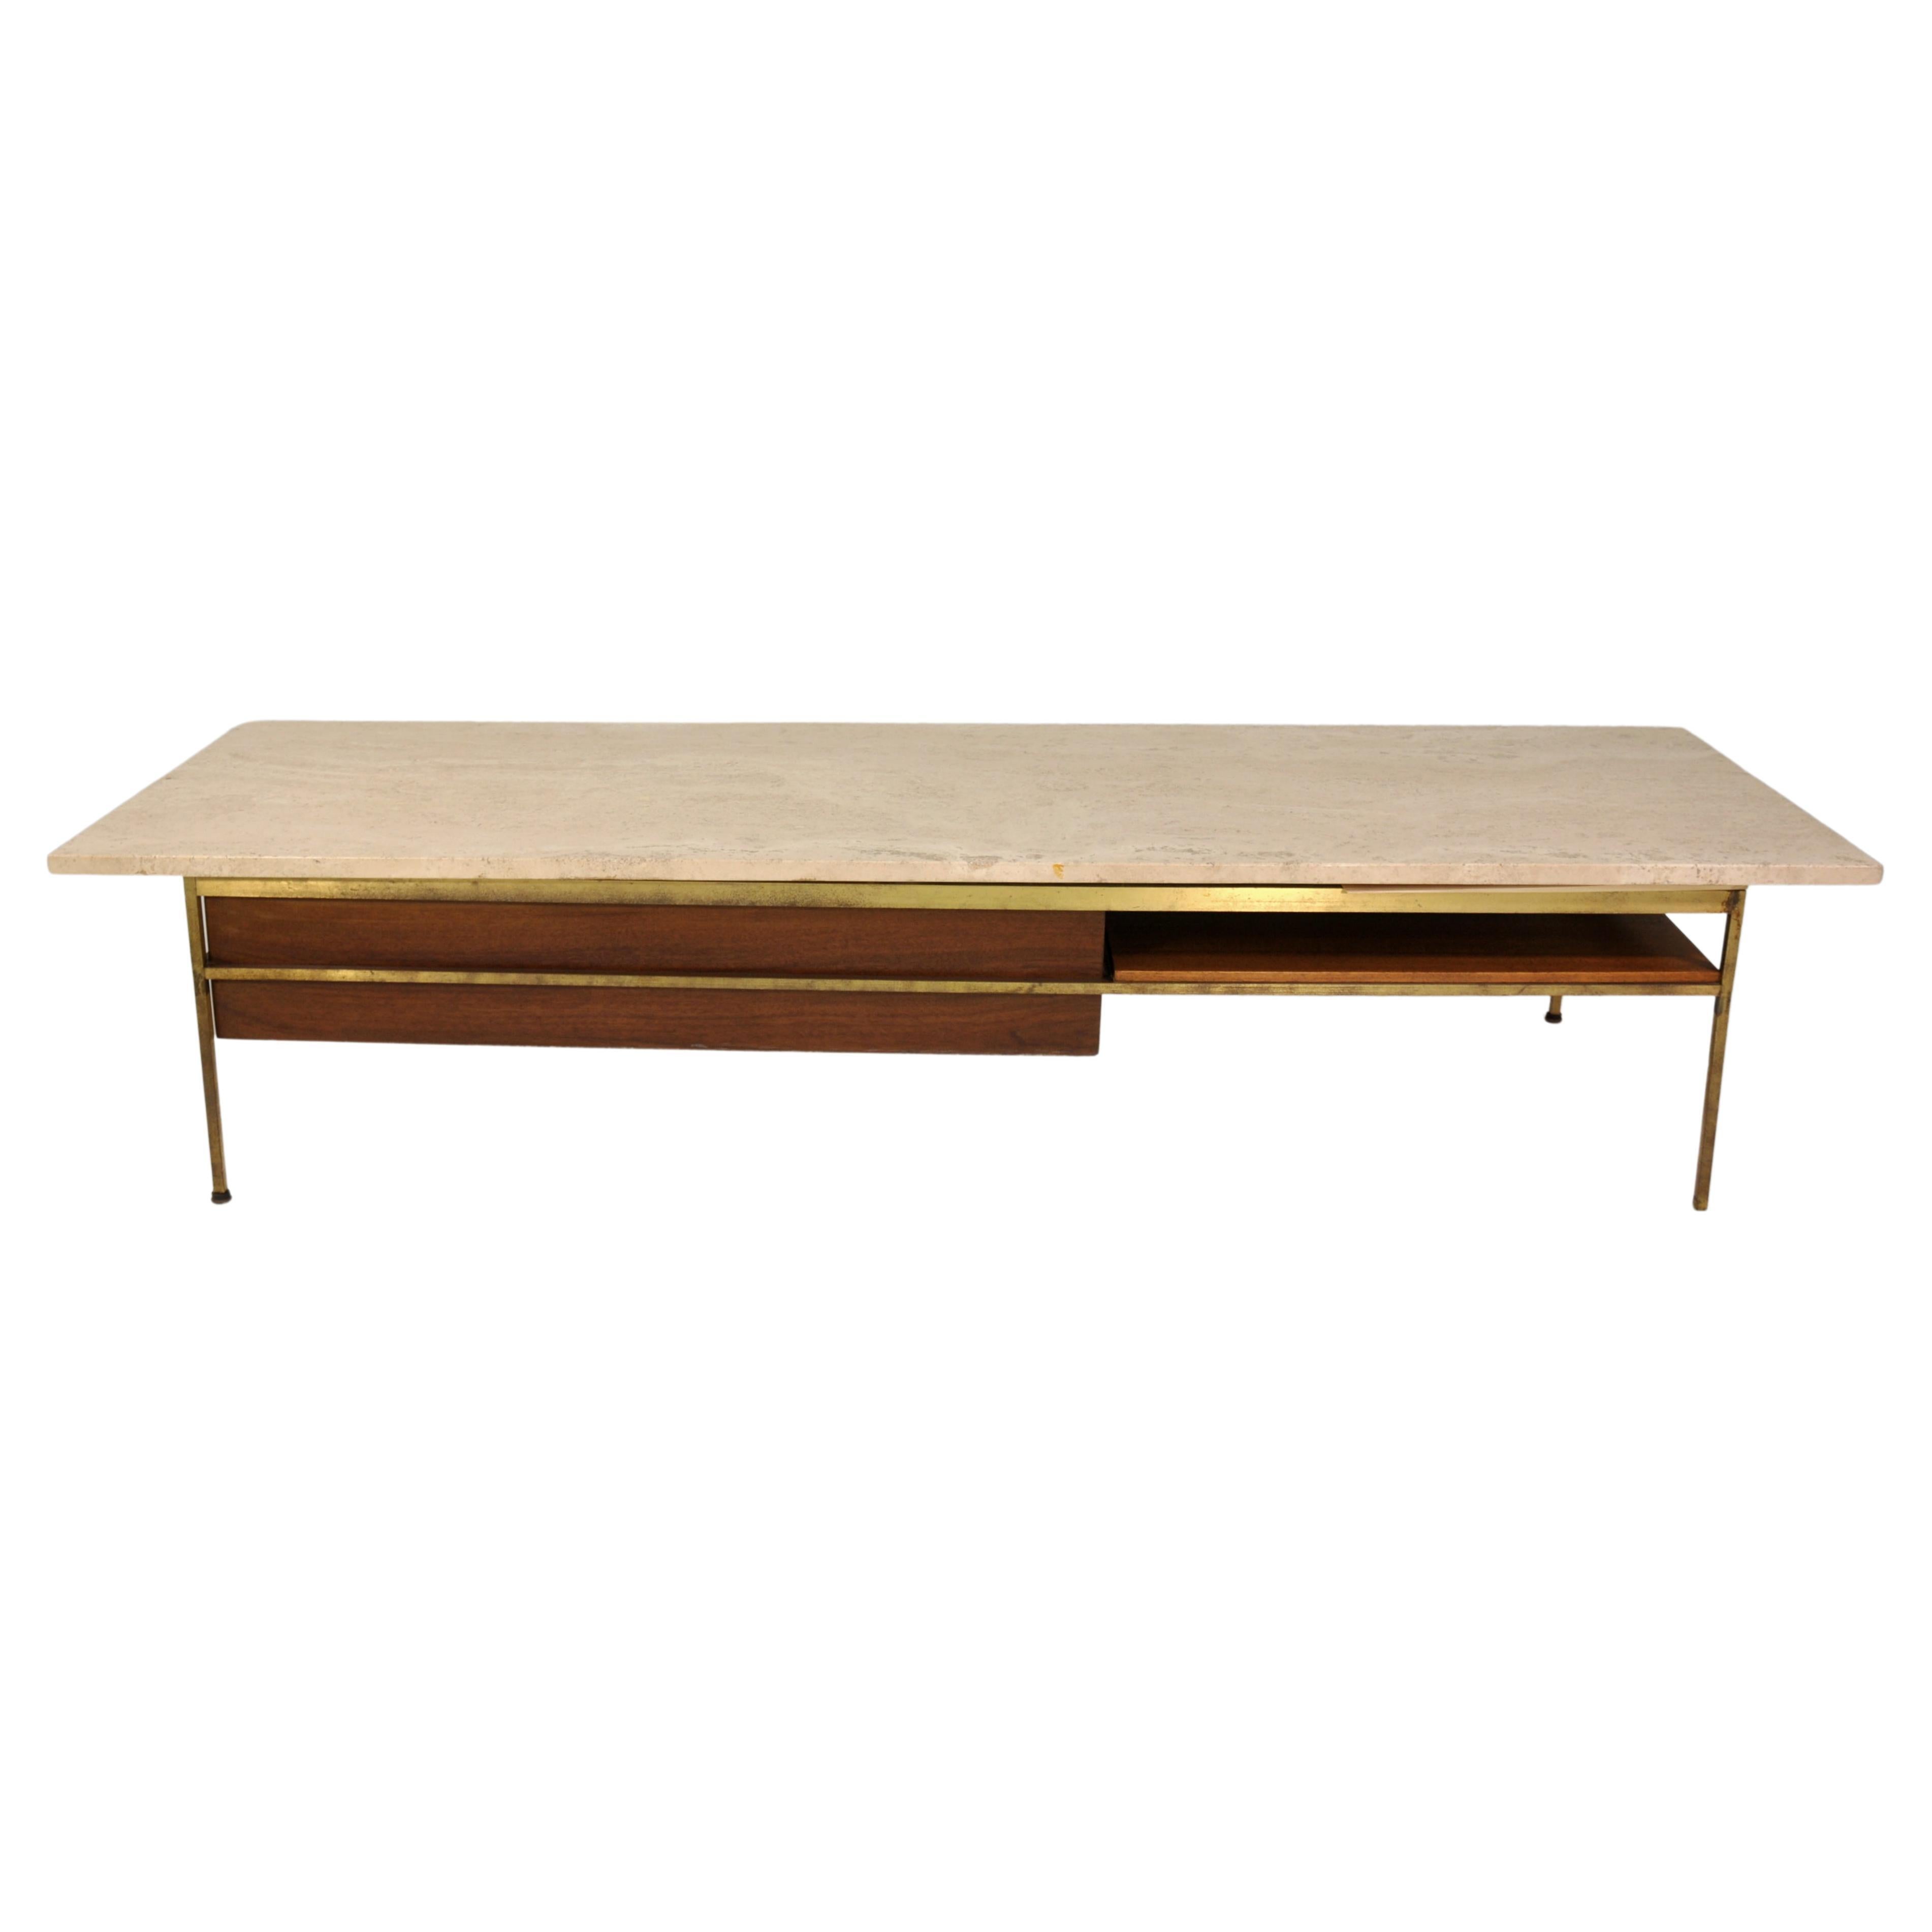 Paul McCobb Irwin Collection Brass and Travertine Coffee Table by Calvin 1